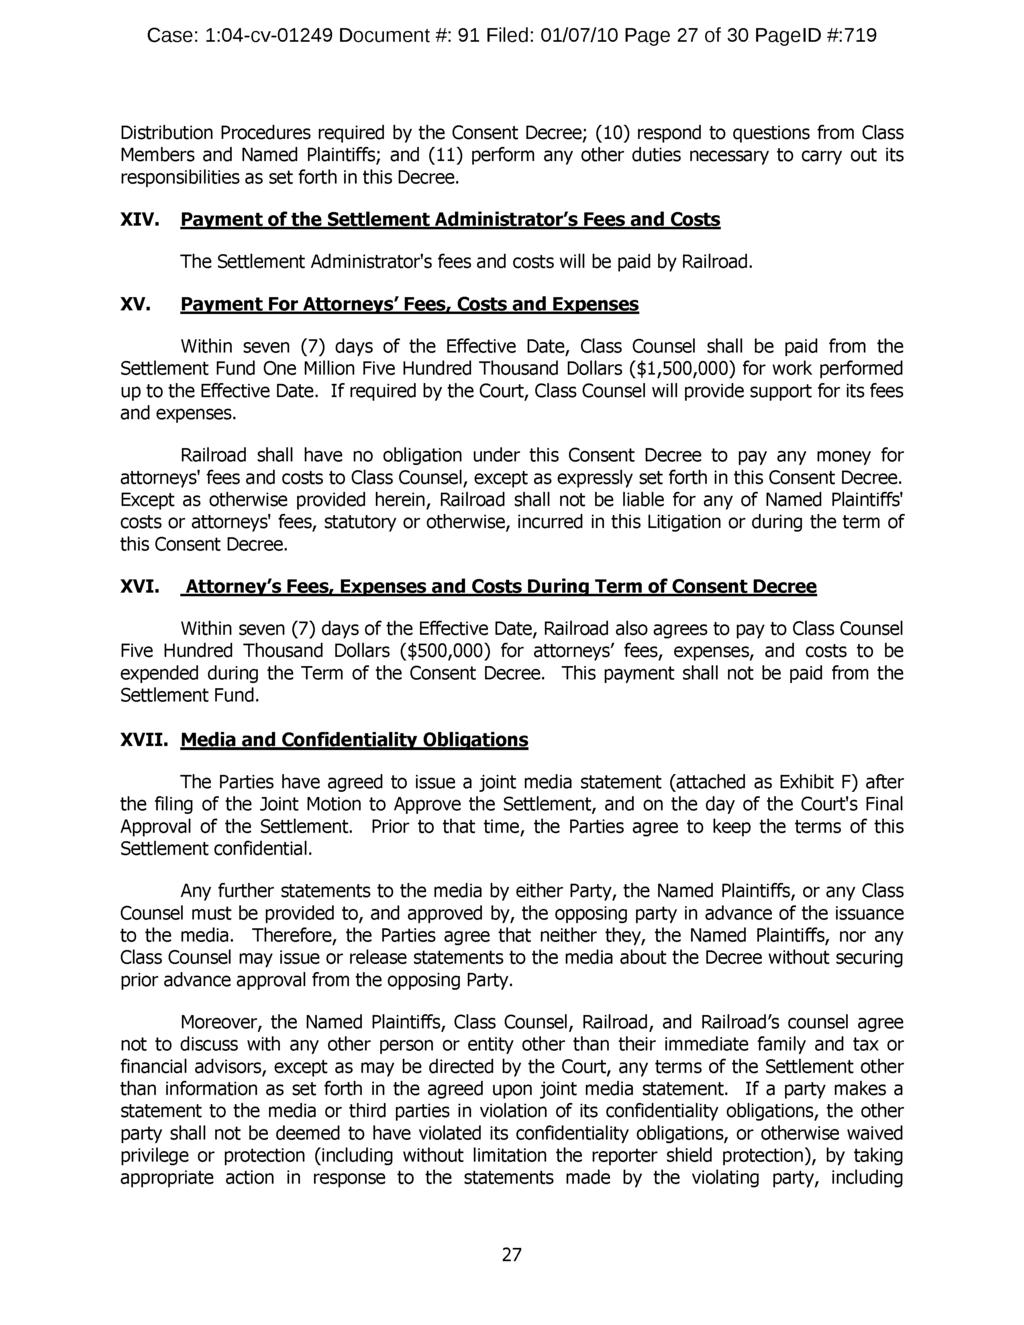 Case: 1:04-cv-01249 Document #: 91 Filed: 01/07/10 Page 27 of 30 PagelD #:719 Distribution Procedures required by the Consent Decree; (10) respond to questions from Class Members and Named